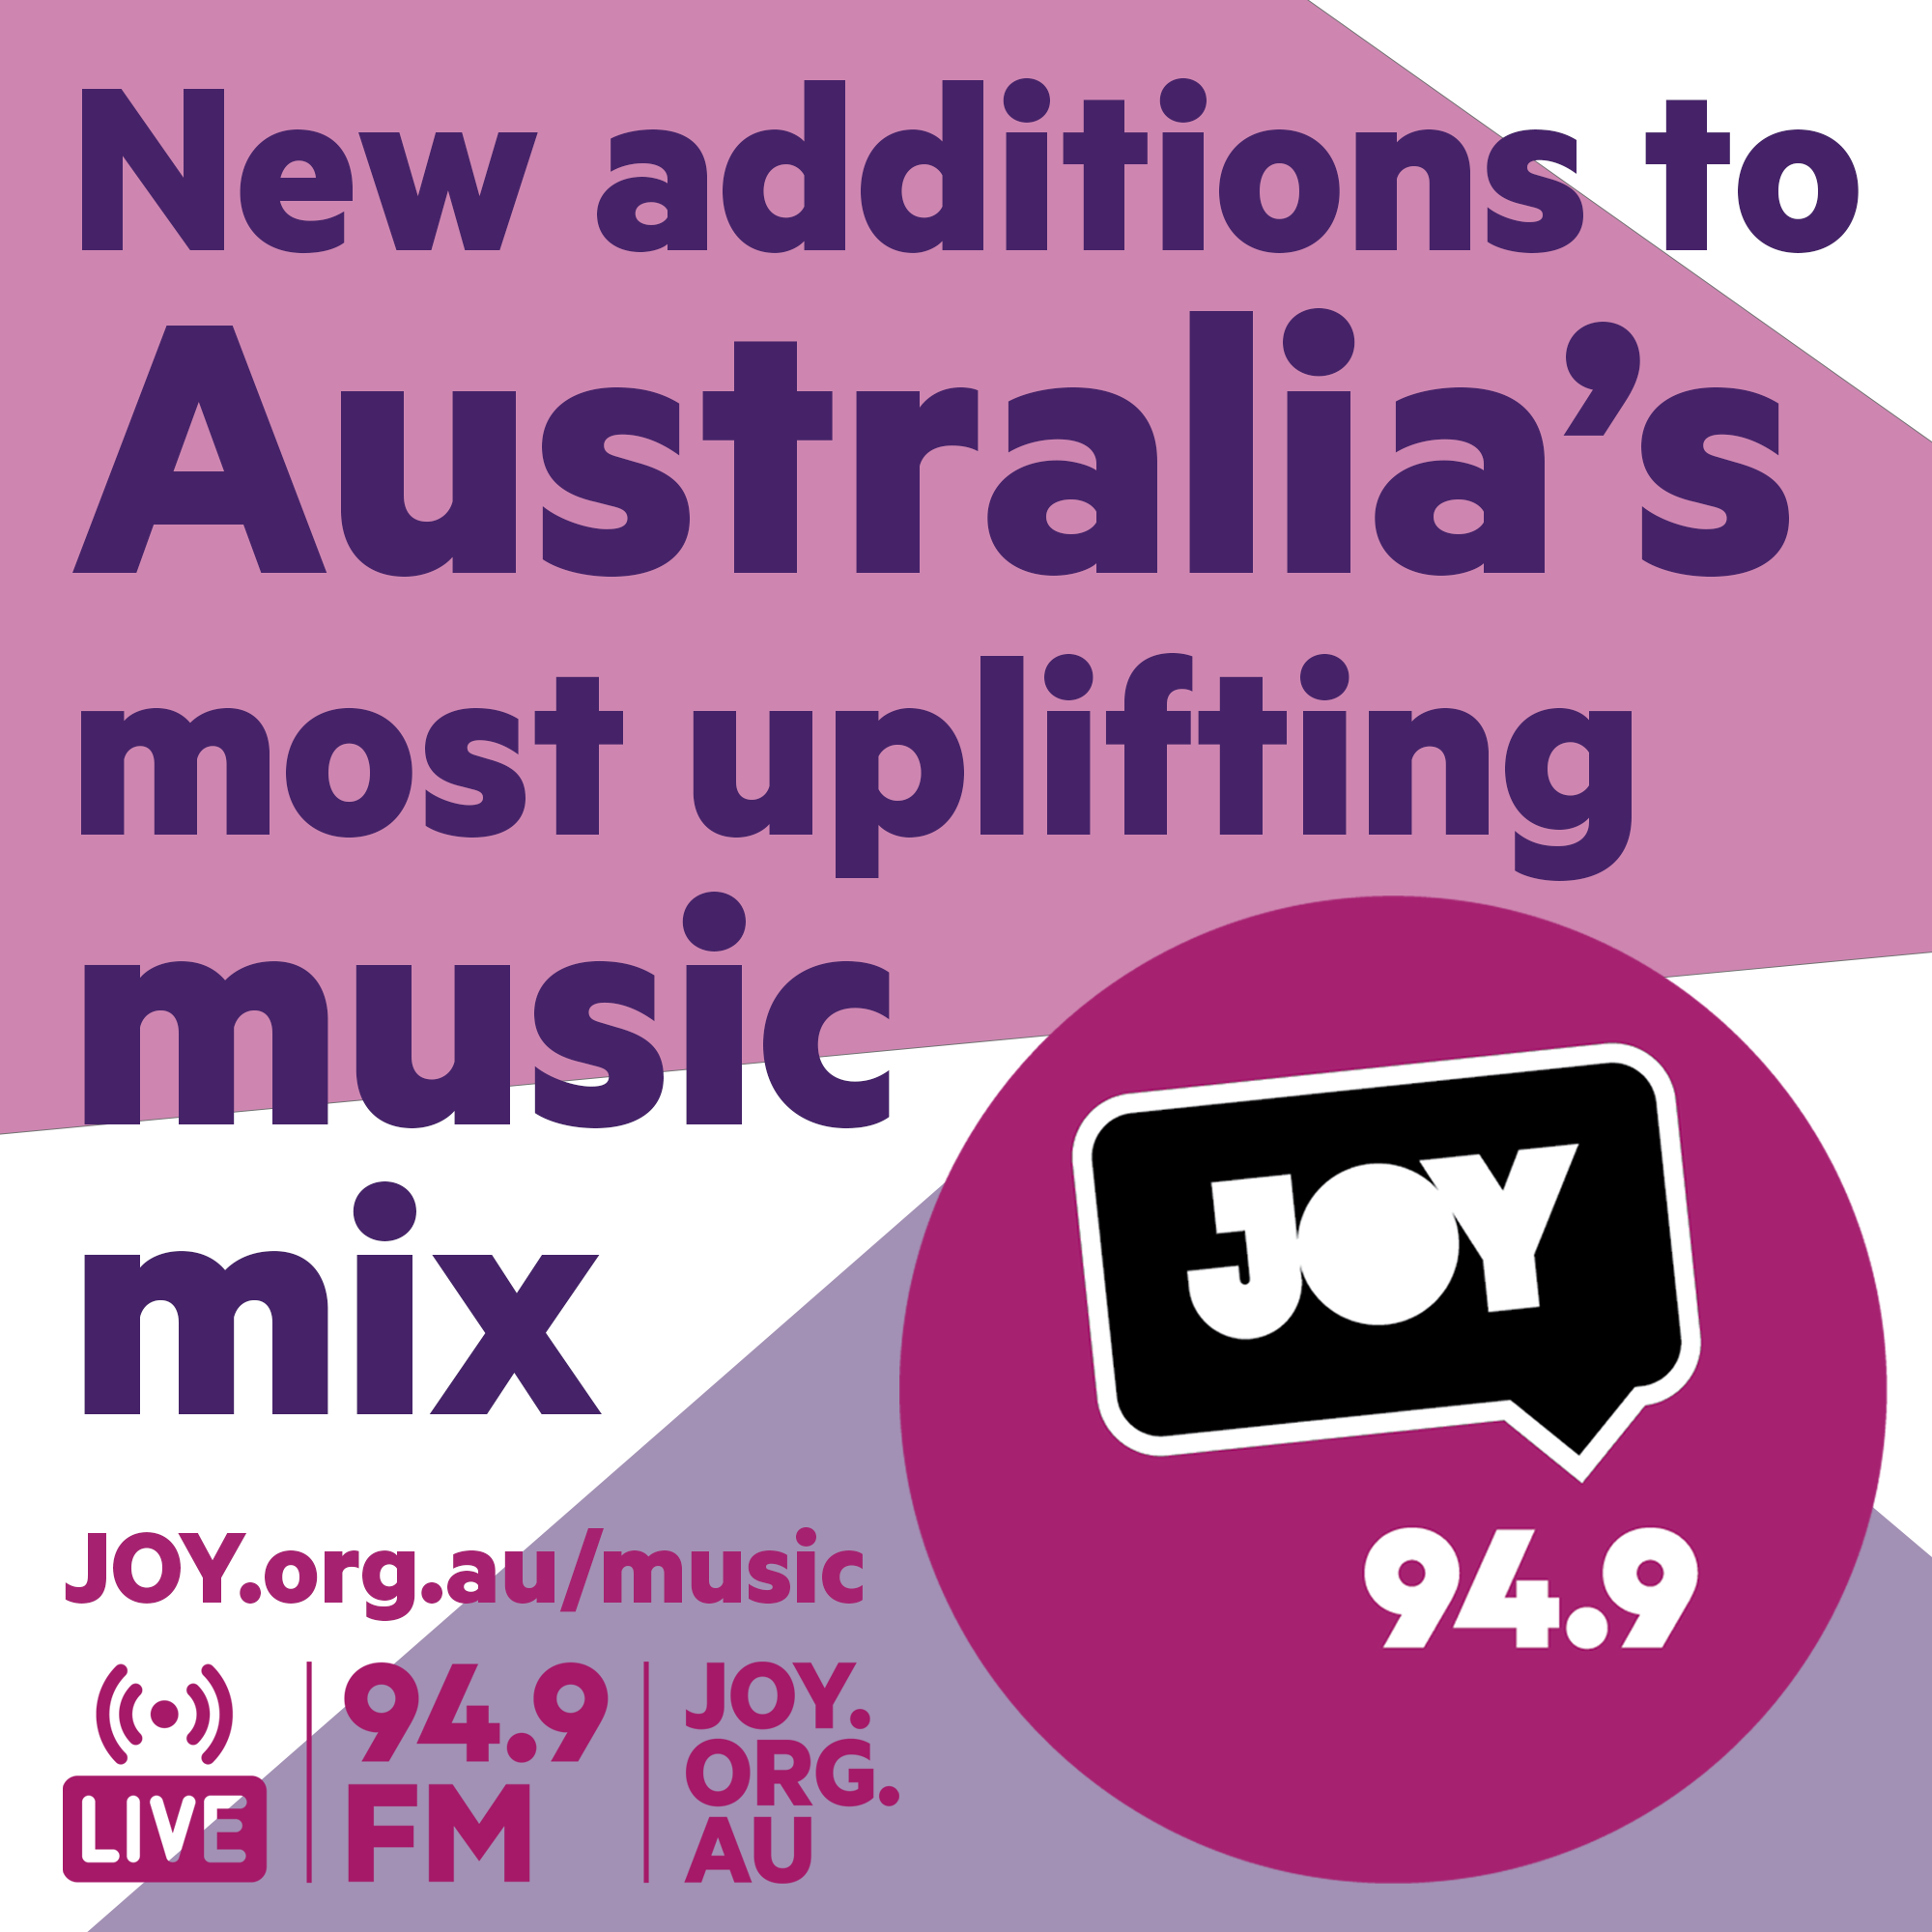 The newest songs to Australia’s most uplifting music mix: 13 April 2022